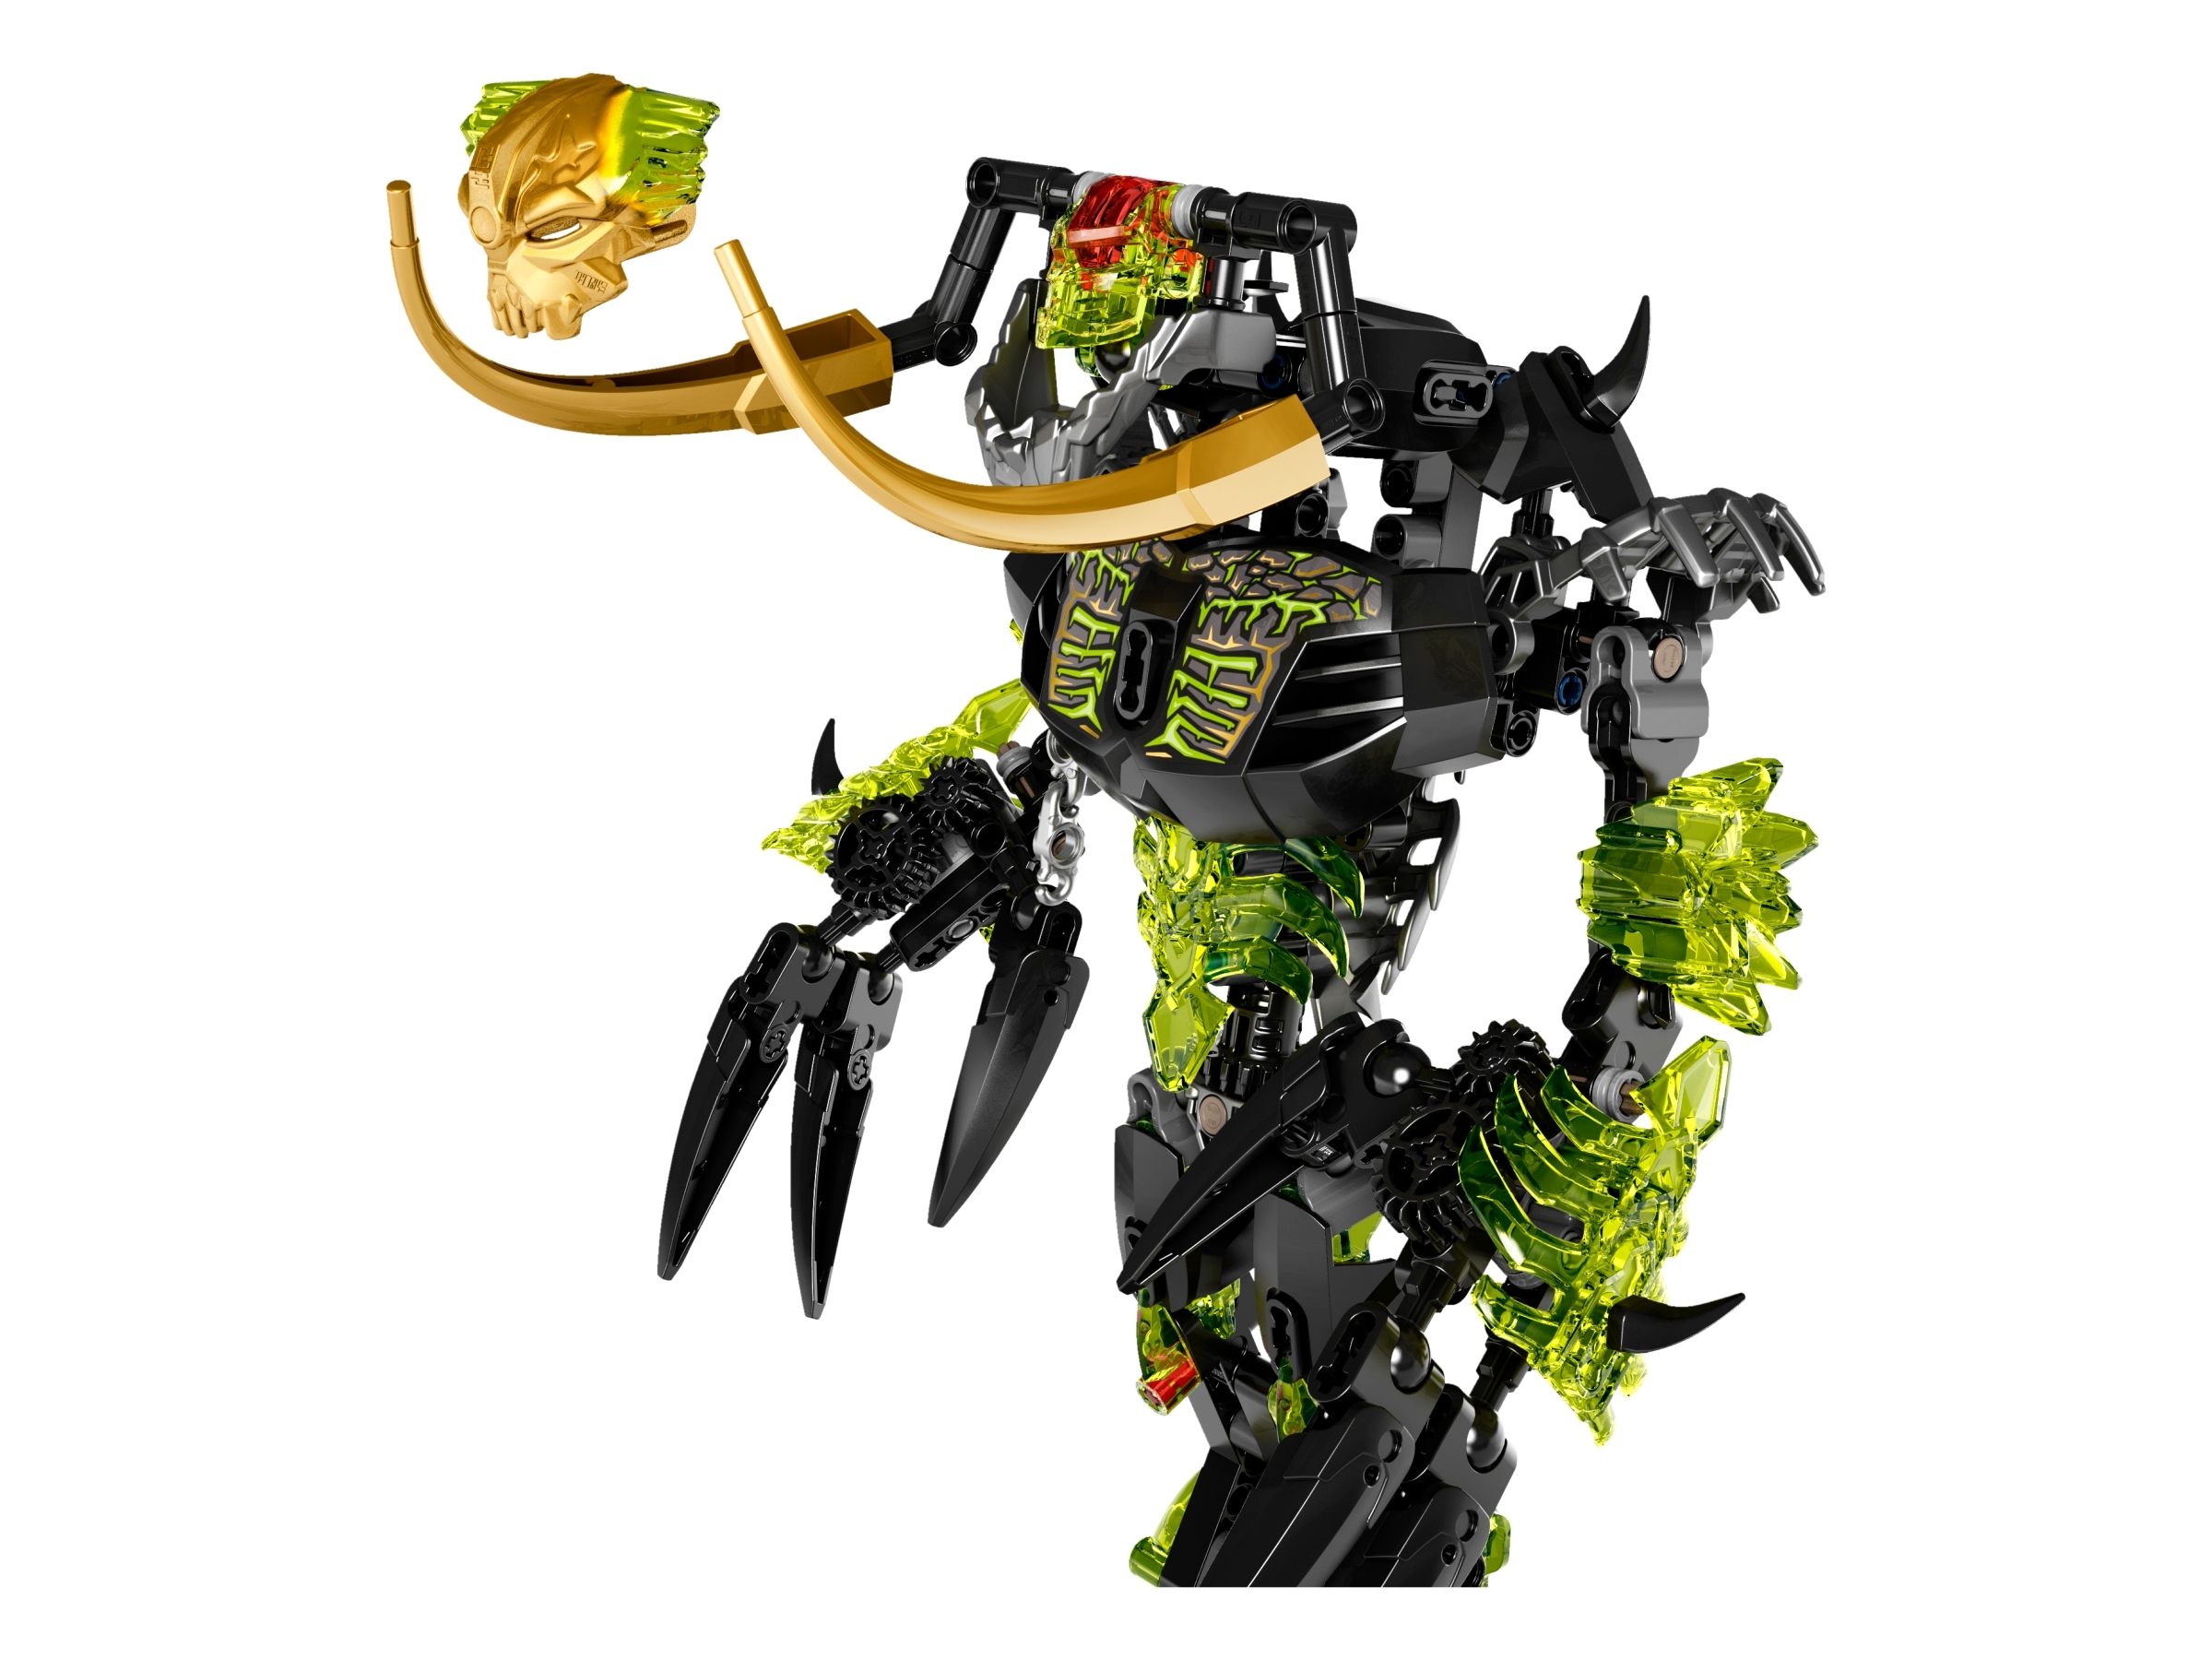 Umarak the Destroyer | BIONICLE® Buy online at the Official LEGO® Shop